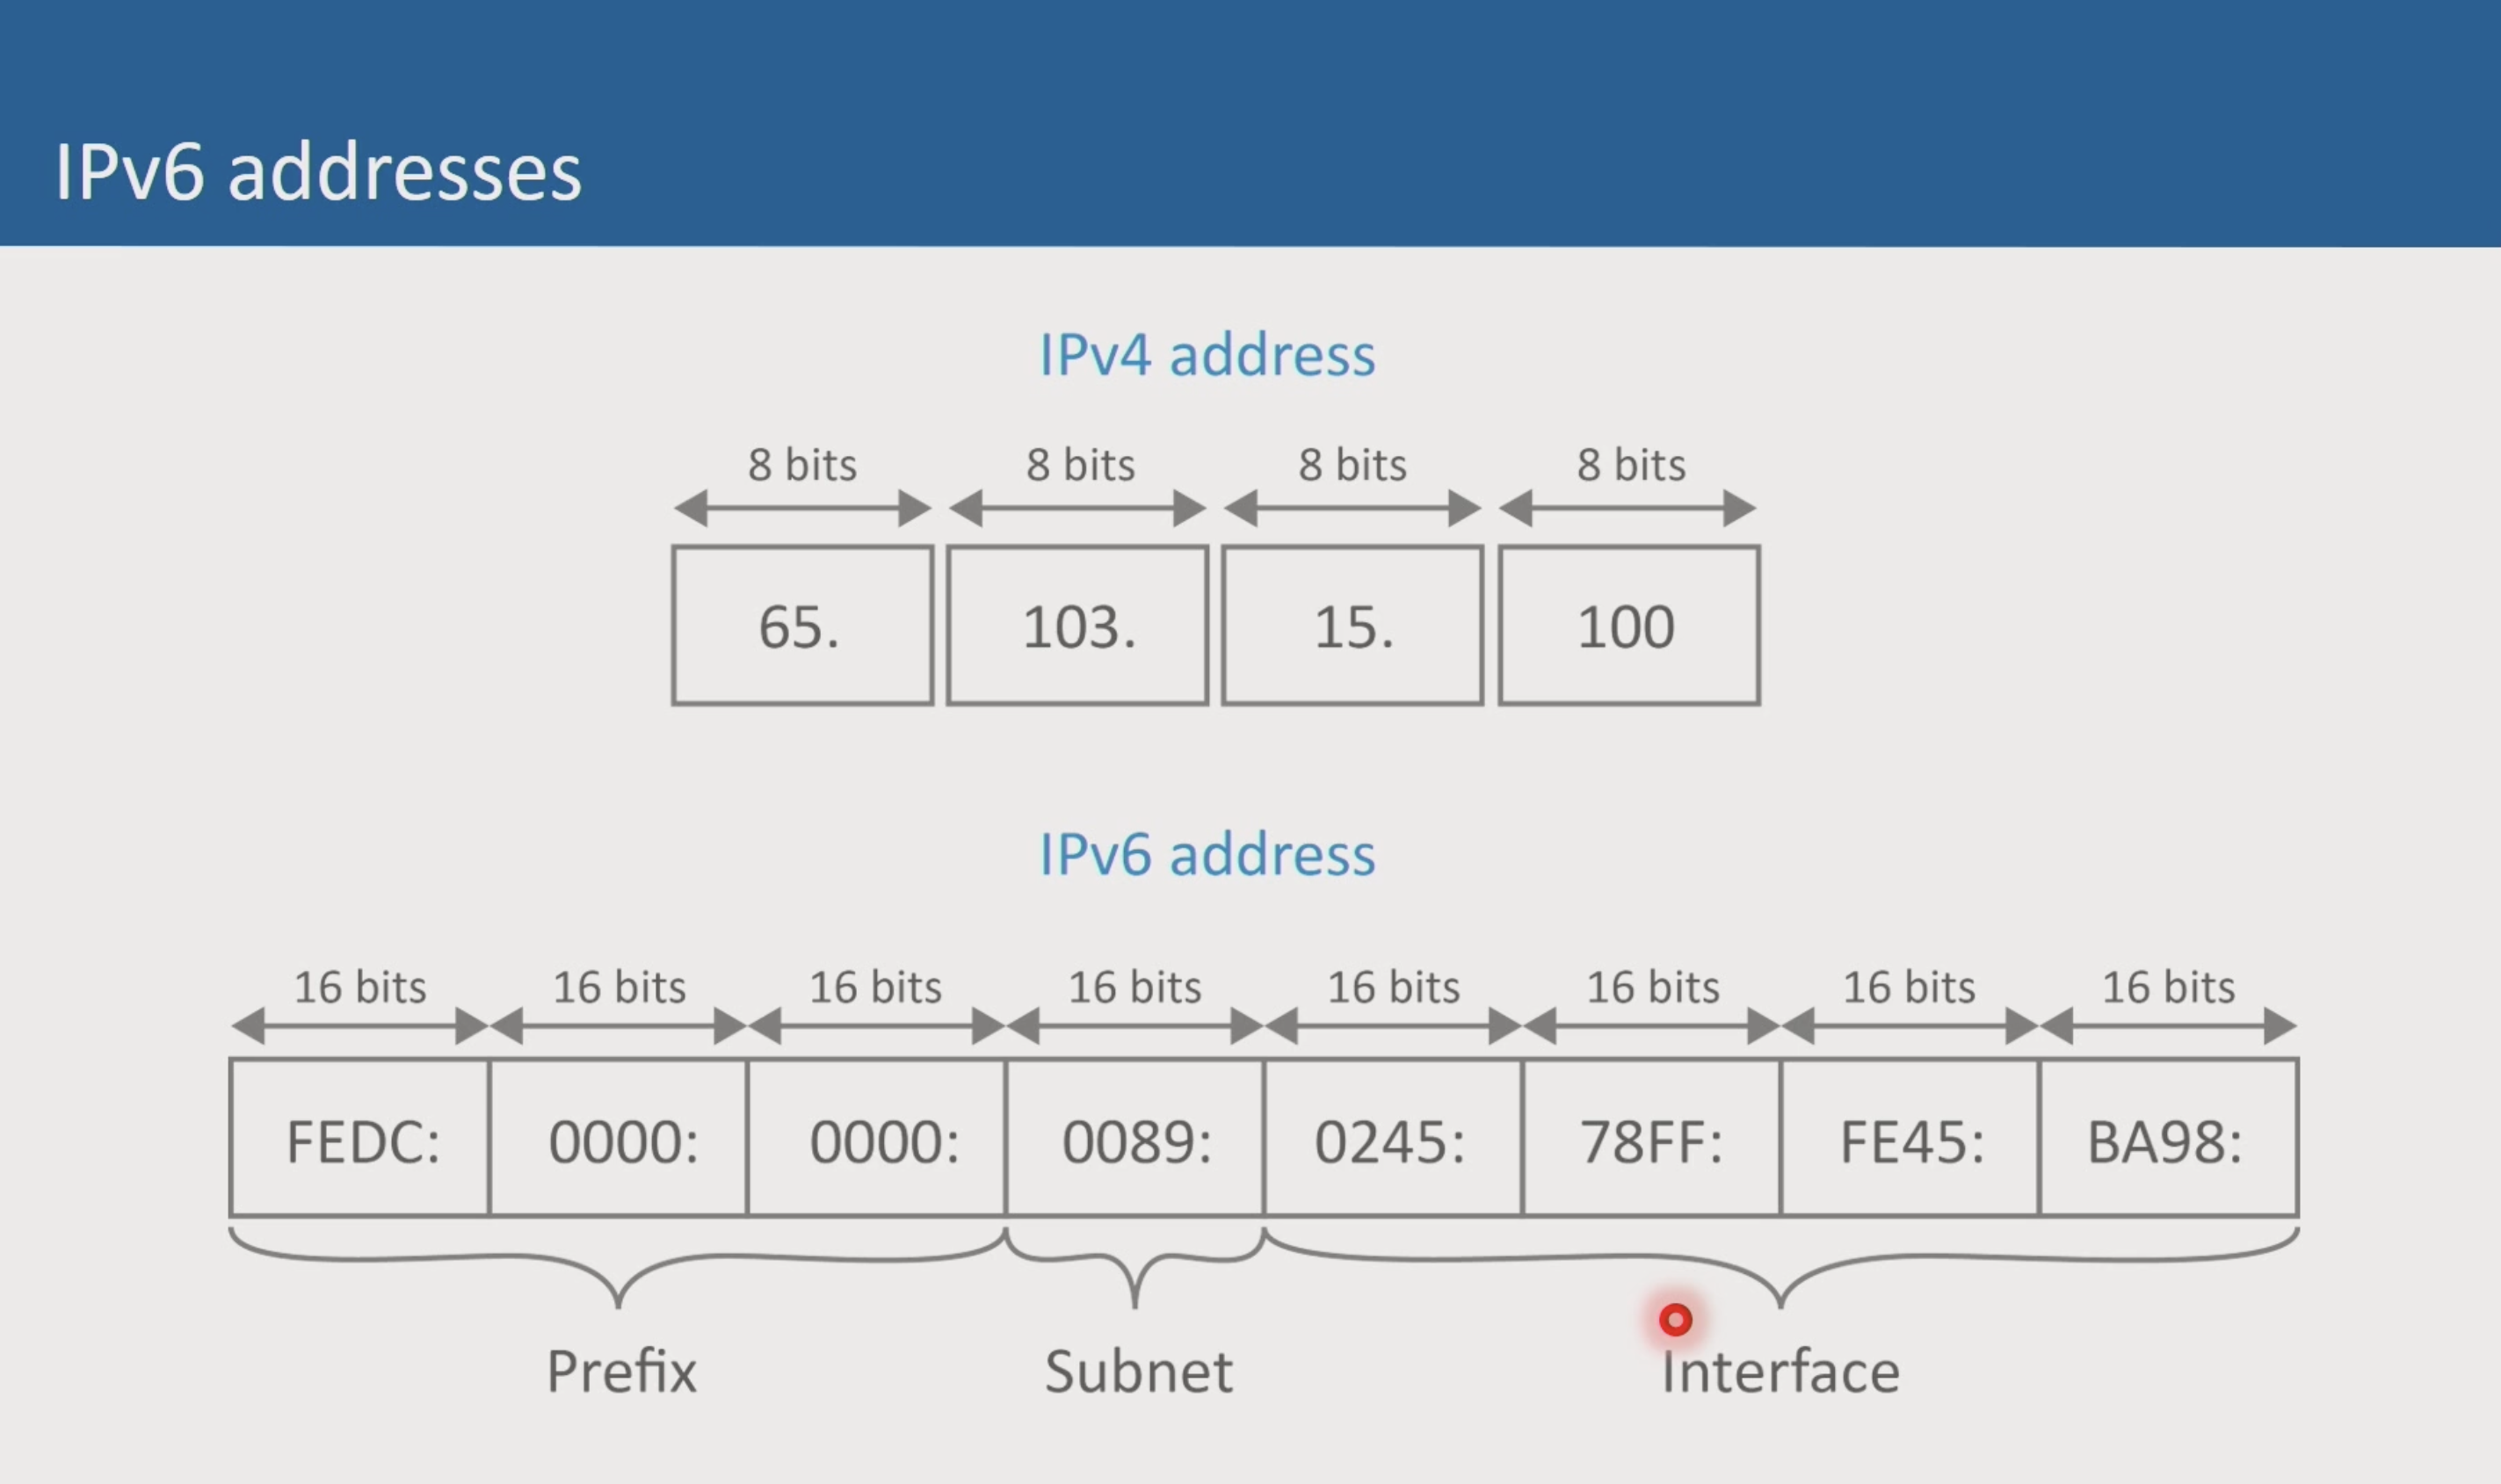 representational depiction of the hexidecimal groupings of an ipv4 address